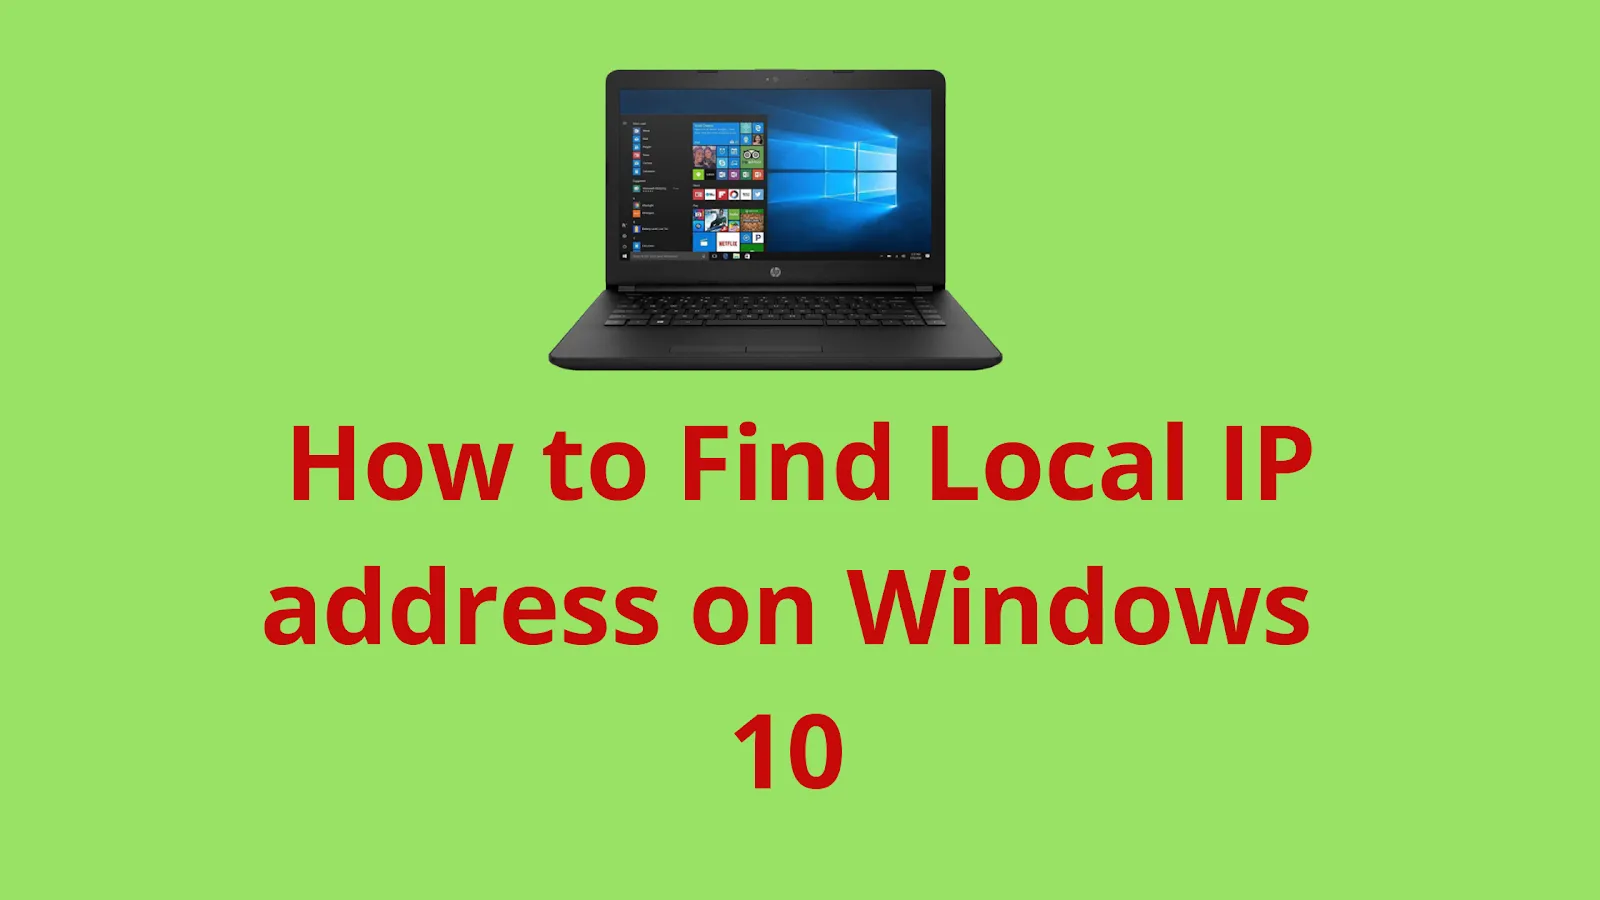 How to Find Local IP address on Windows 10